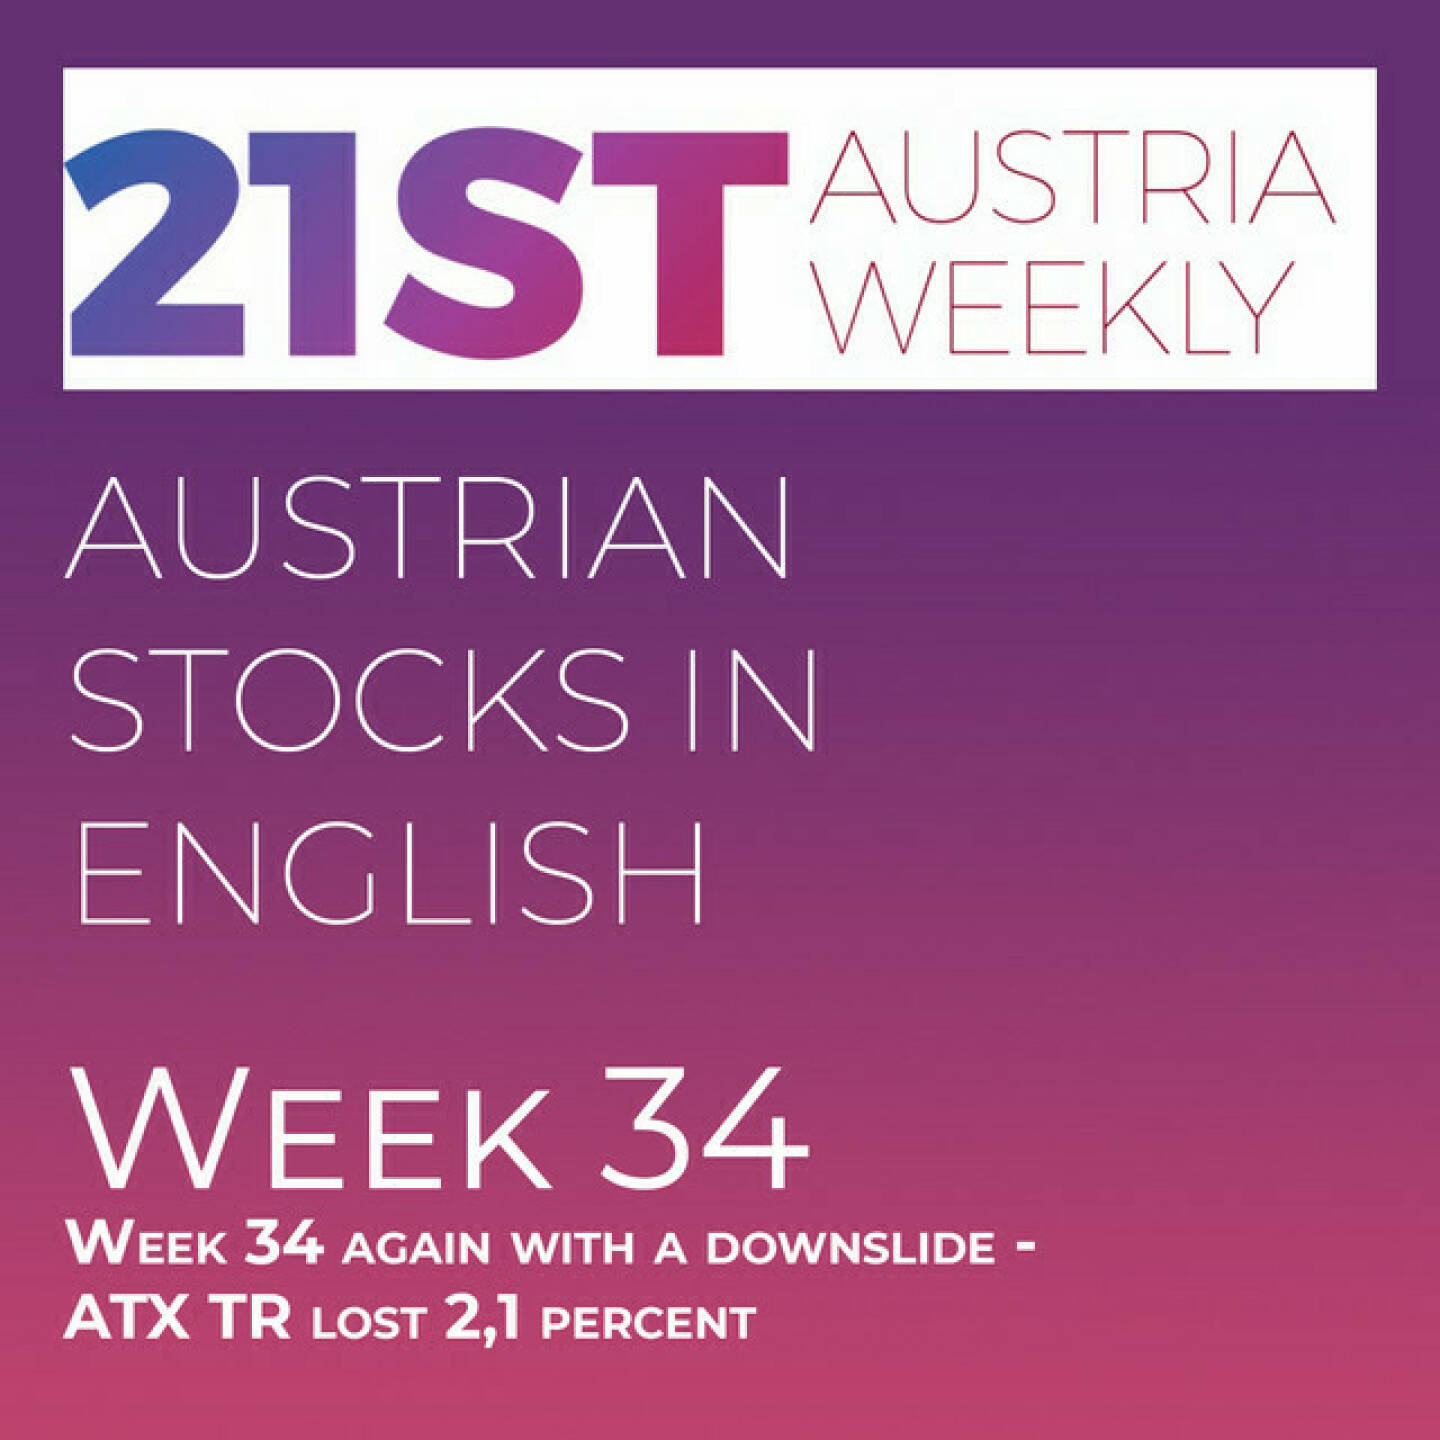 https://open.spotify.com/episode/2HrBdOULwmE6iEF6iArFbS
Austrian Stocks in English: Week 34 again with a downslide - ATX TR lost 2,1 percent - <p>Welcome to &#34;Austrian Stocks in English - presented by Palfinger&#34;, the new and weekly english spoken Summary for the Austrian Stock Market, positioned every Sunday in the mostly german languaged Podcast &#34; Christian Drastil - Wiener Börse, Sport Musik und Mehr“ . Week 34 brought again a downside for ATX TR, which lost -2,1 percent. Year-to-date the ATX TR is now at -20,7%. Up to now there were 81 days with a positive and 86 with a negative gain.  These are the best-performers kast week: SBO 8,46% in front of Addiko Bank 3,81% and OMV 3,26%. And the following stocks performed worst: Lenzing -6,33% in front of Erste Group -6,27% and DO&amp;CO -6,05%. News came from Wienerberger, Andritz, Lenzing, Immofinanz, Marinomed, UBM, EVN, Fabasoft and Vienna Airport</p>